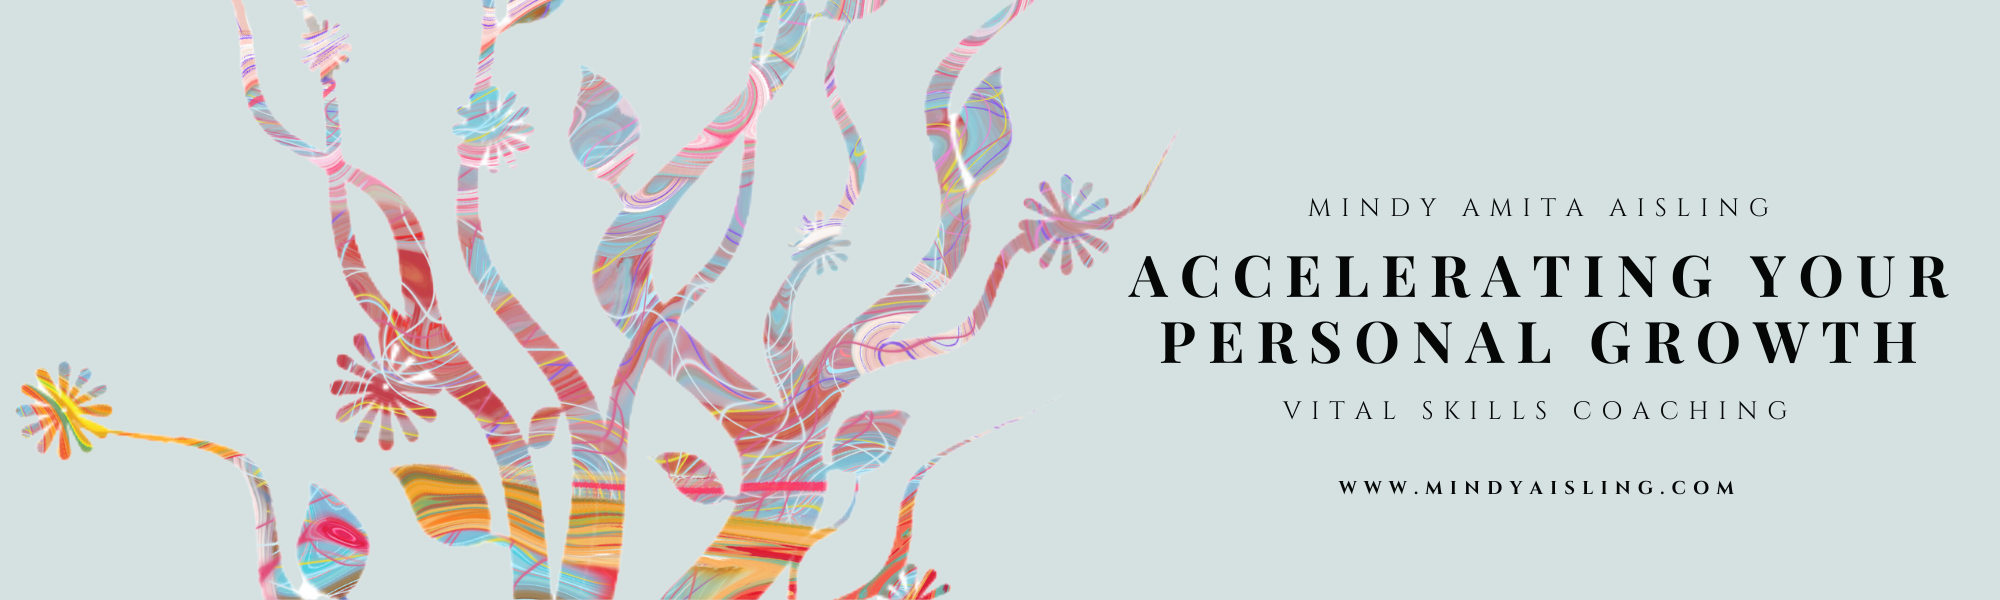 Accelerating Your Personal Growth